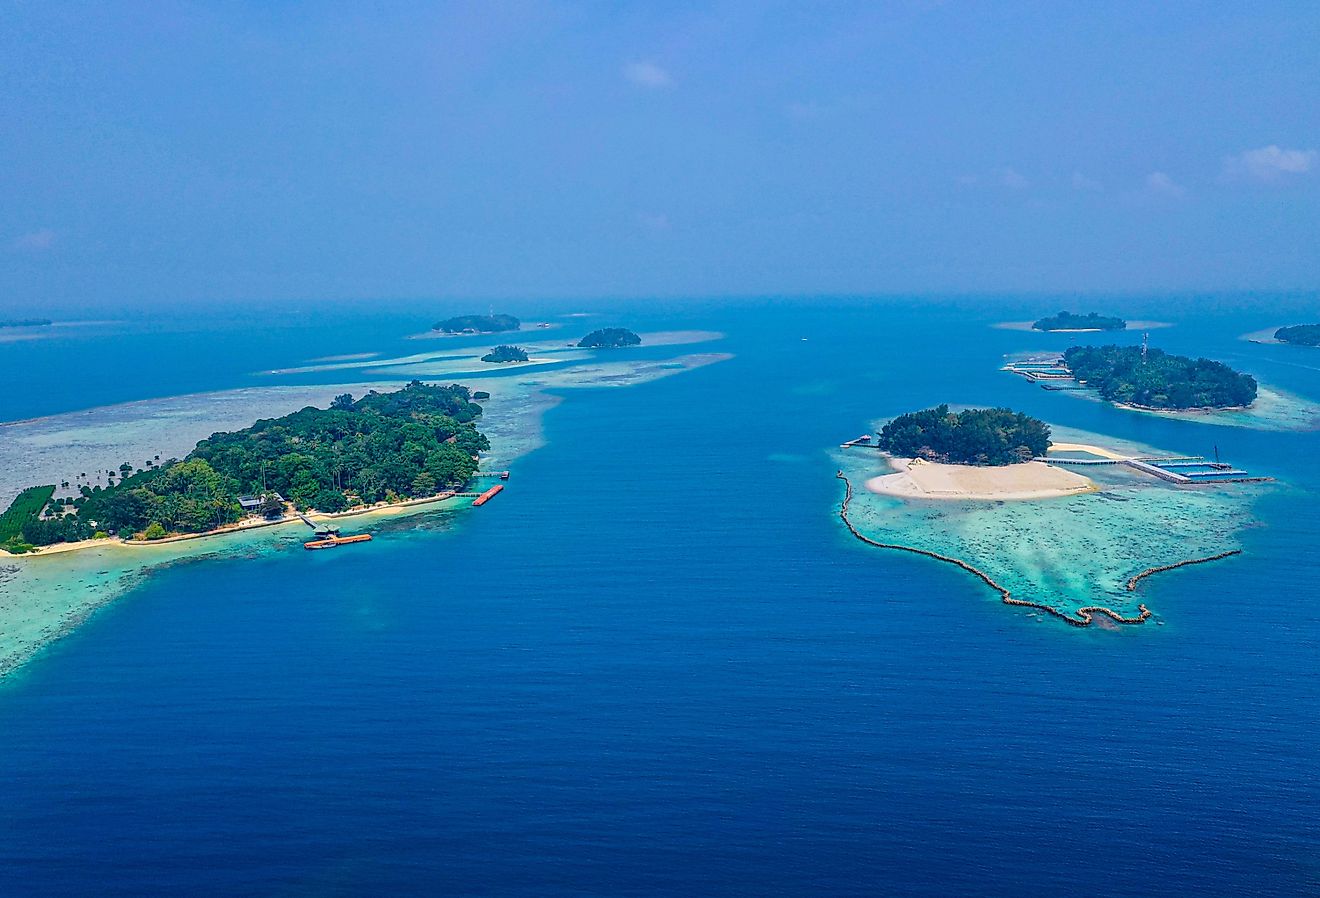 Aerial view of Thousand Islands in Java, Indonesia. Image credit Bryce P via Shutterstock.